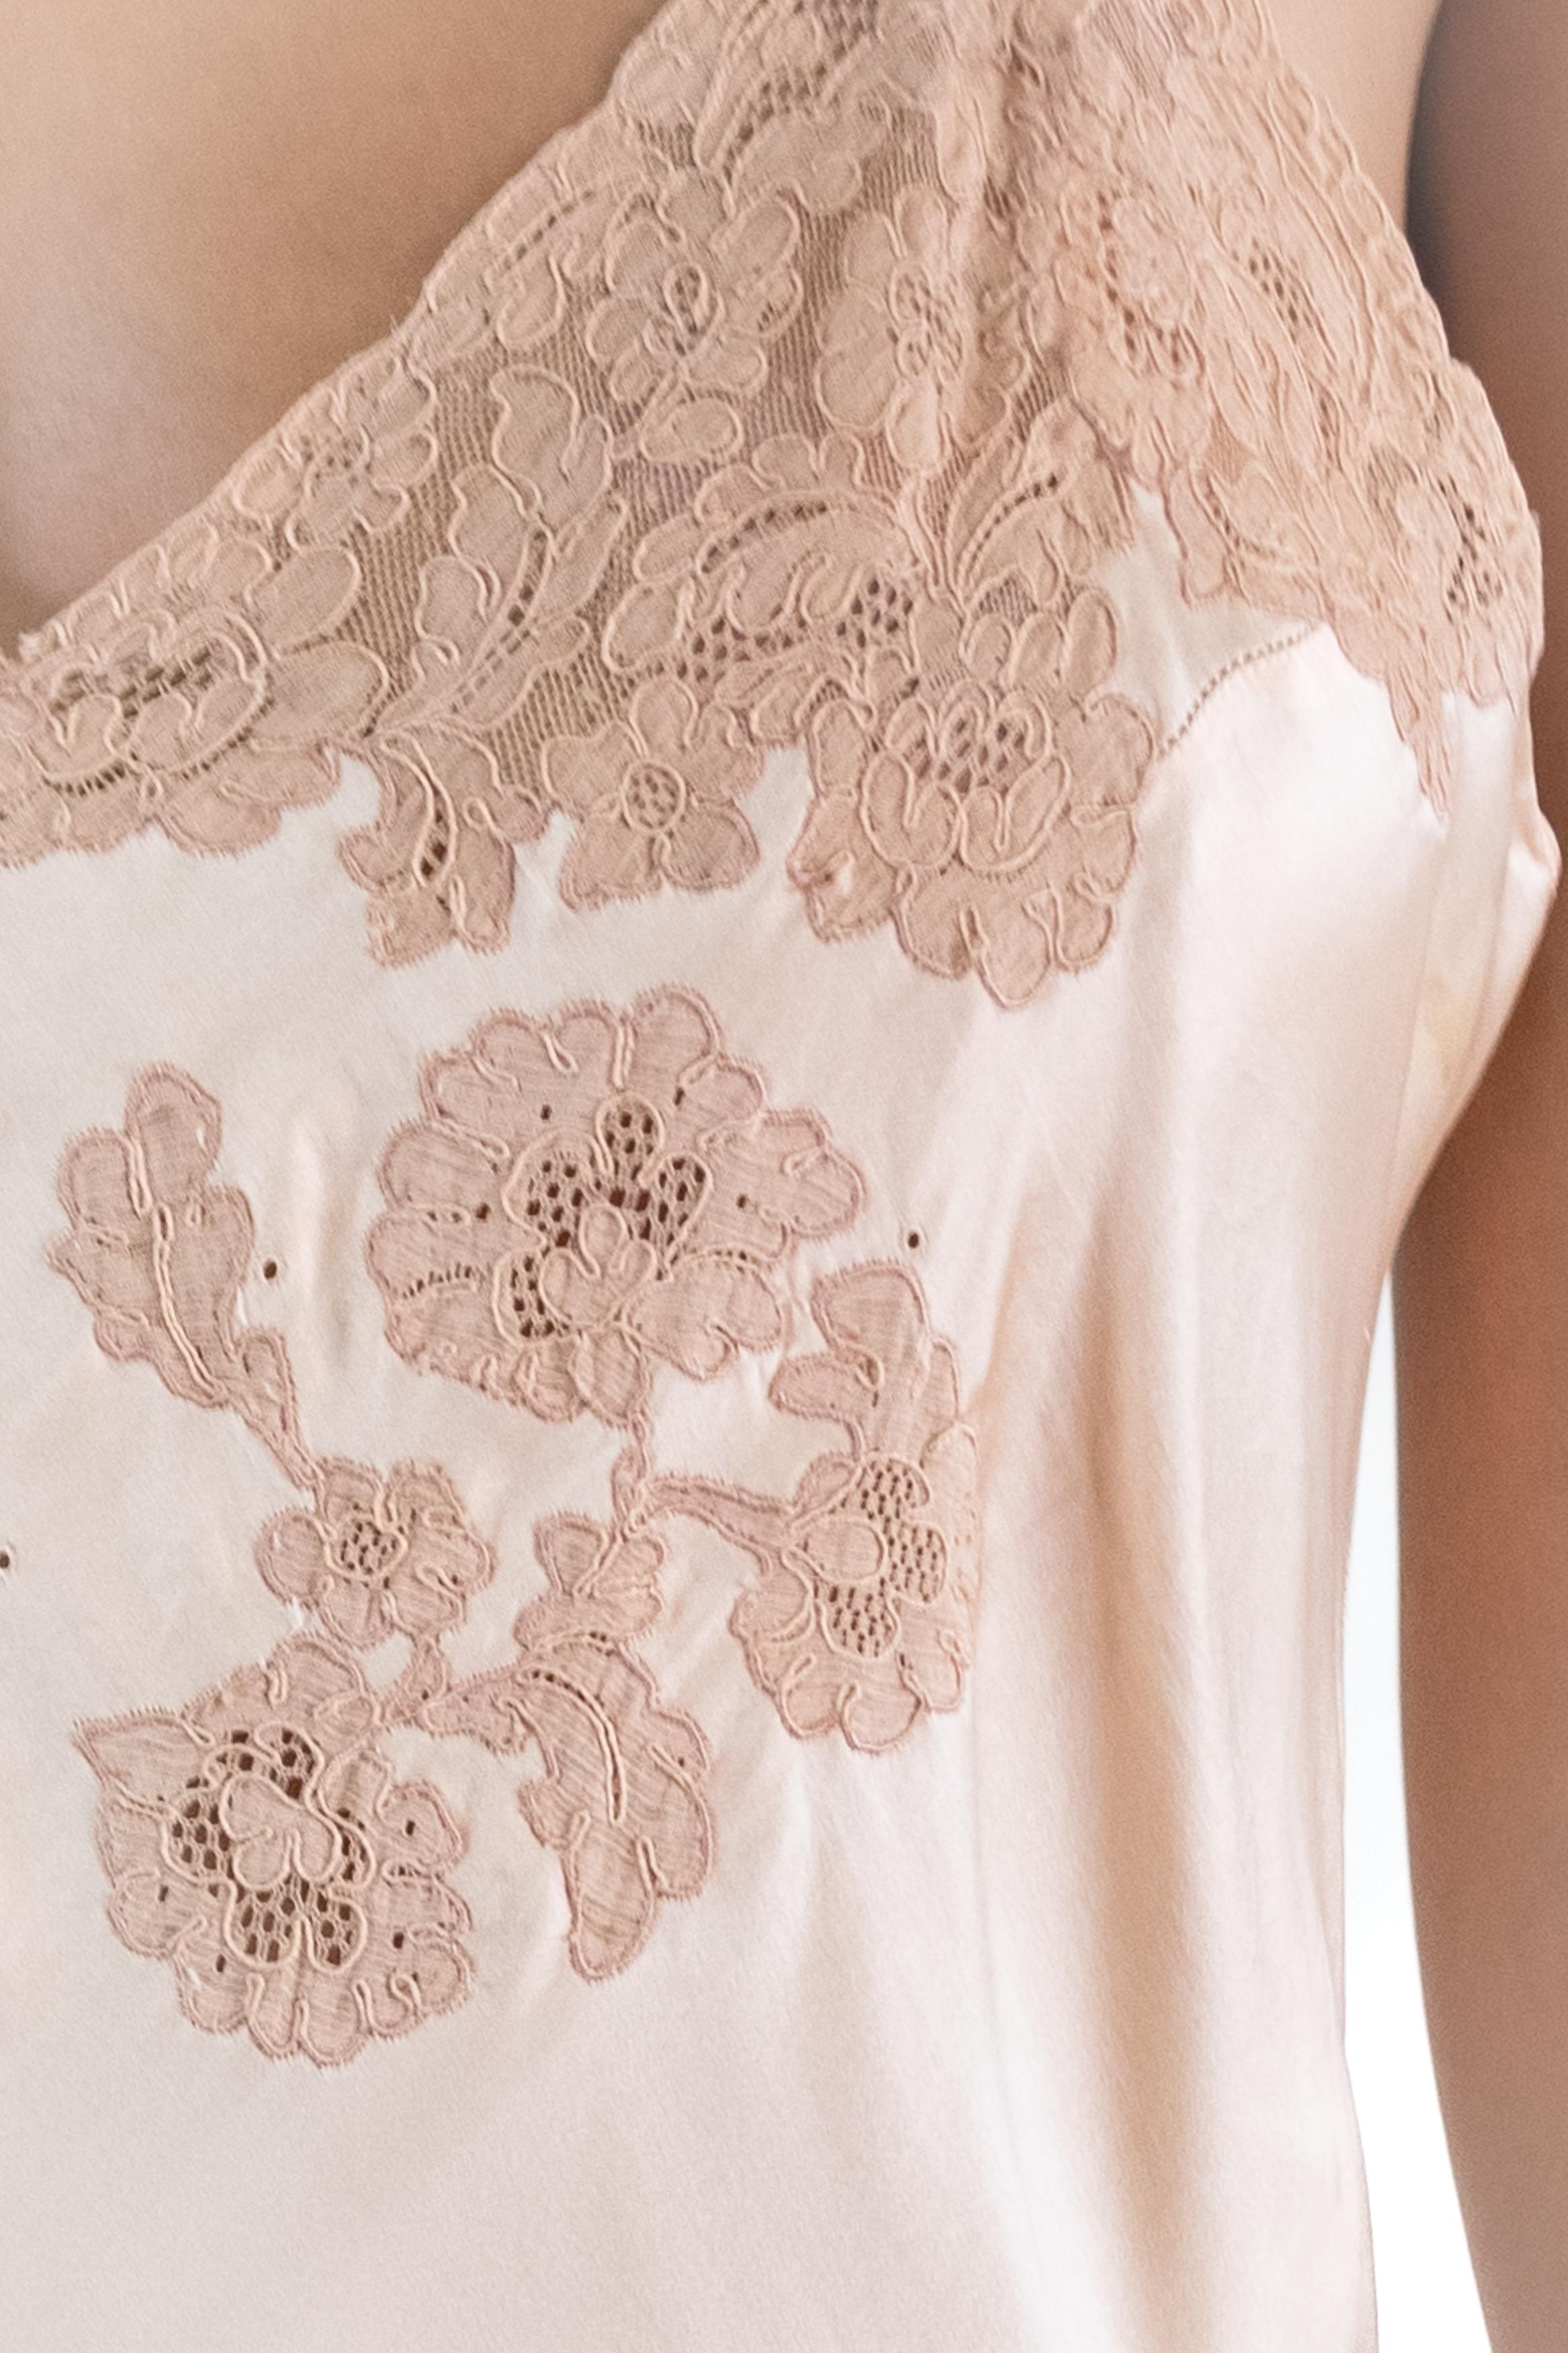 1940S Bontell Peach Silk Slip All Handmade With Lace Detail For Sale 4